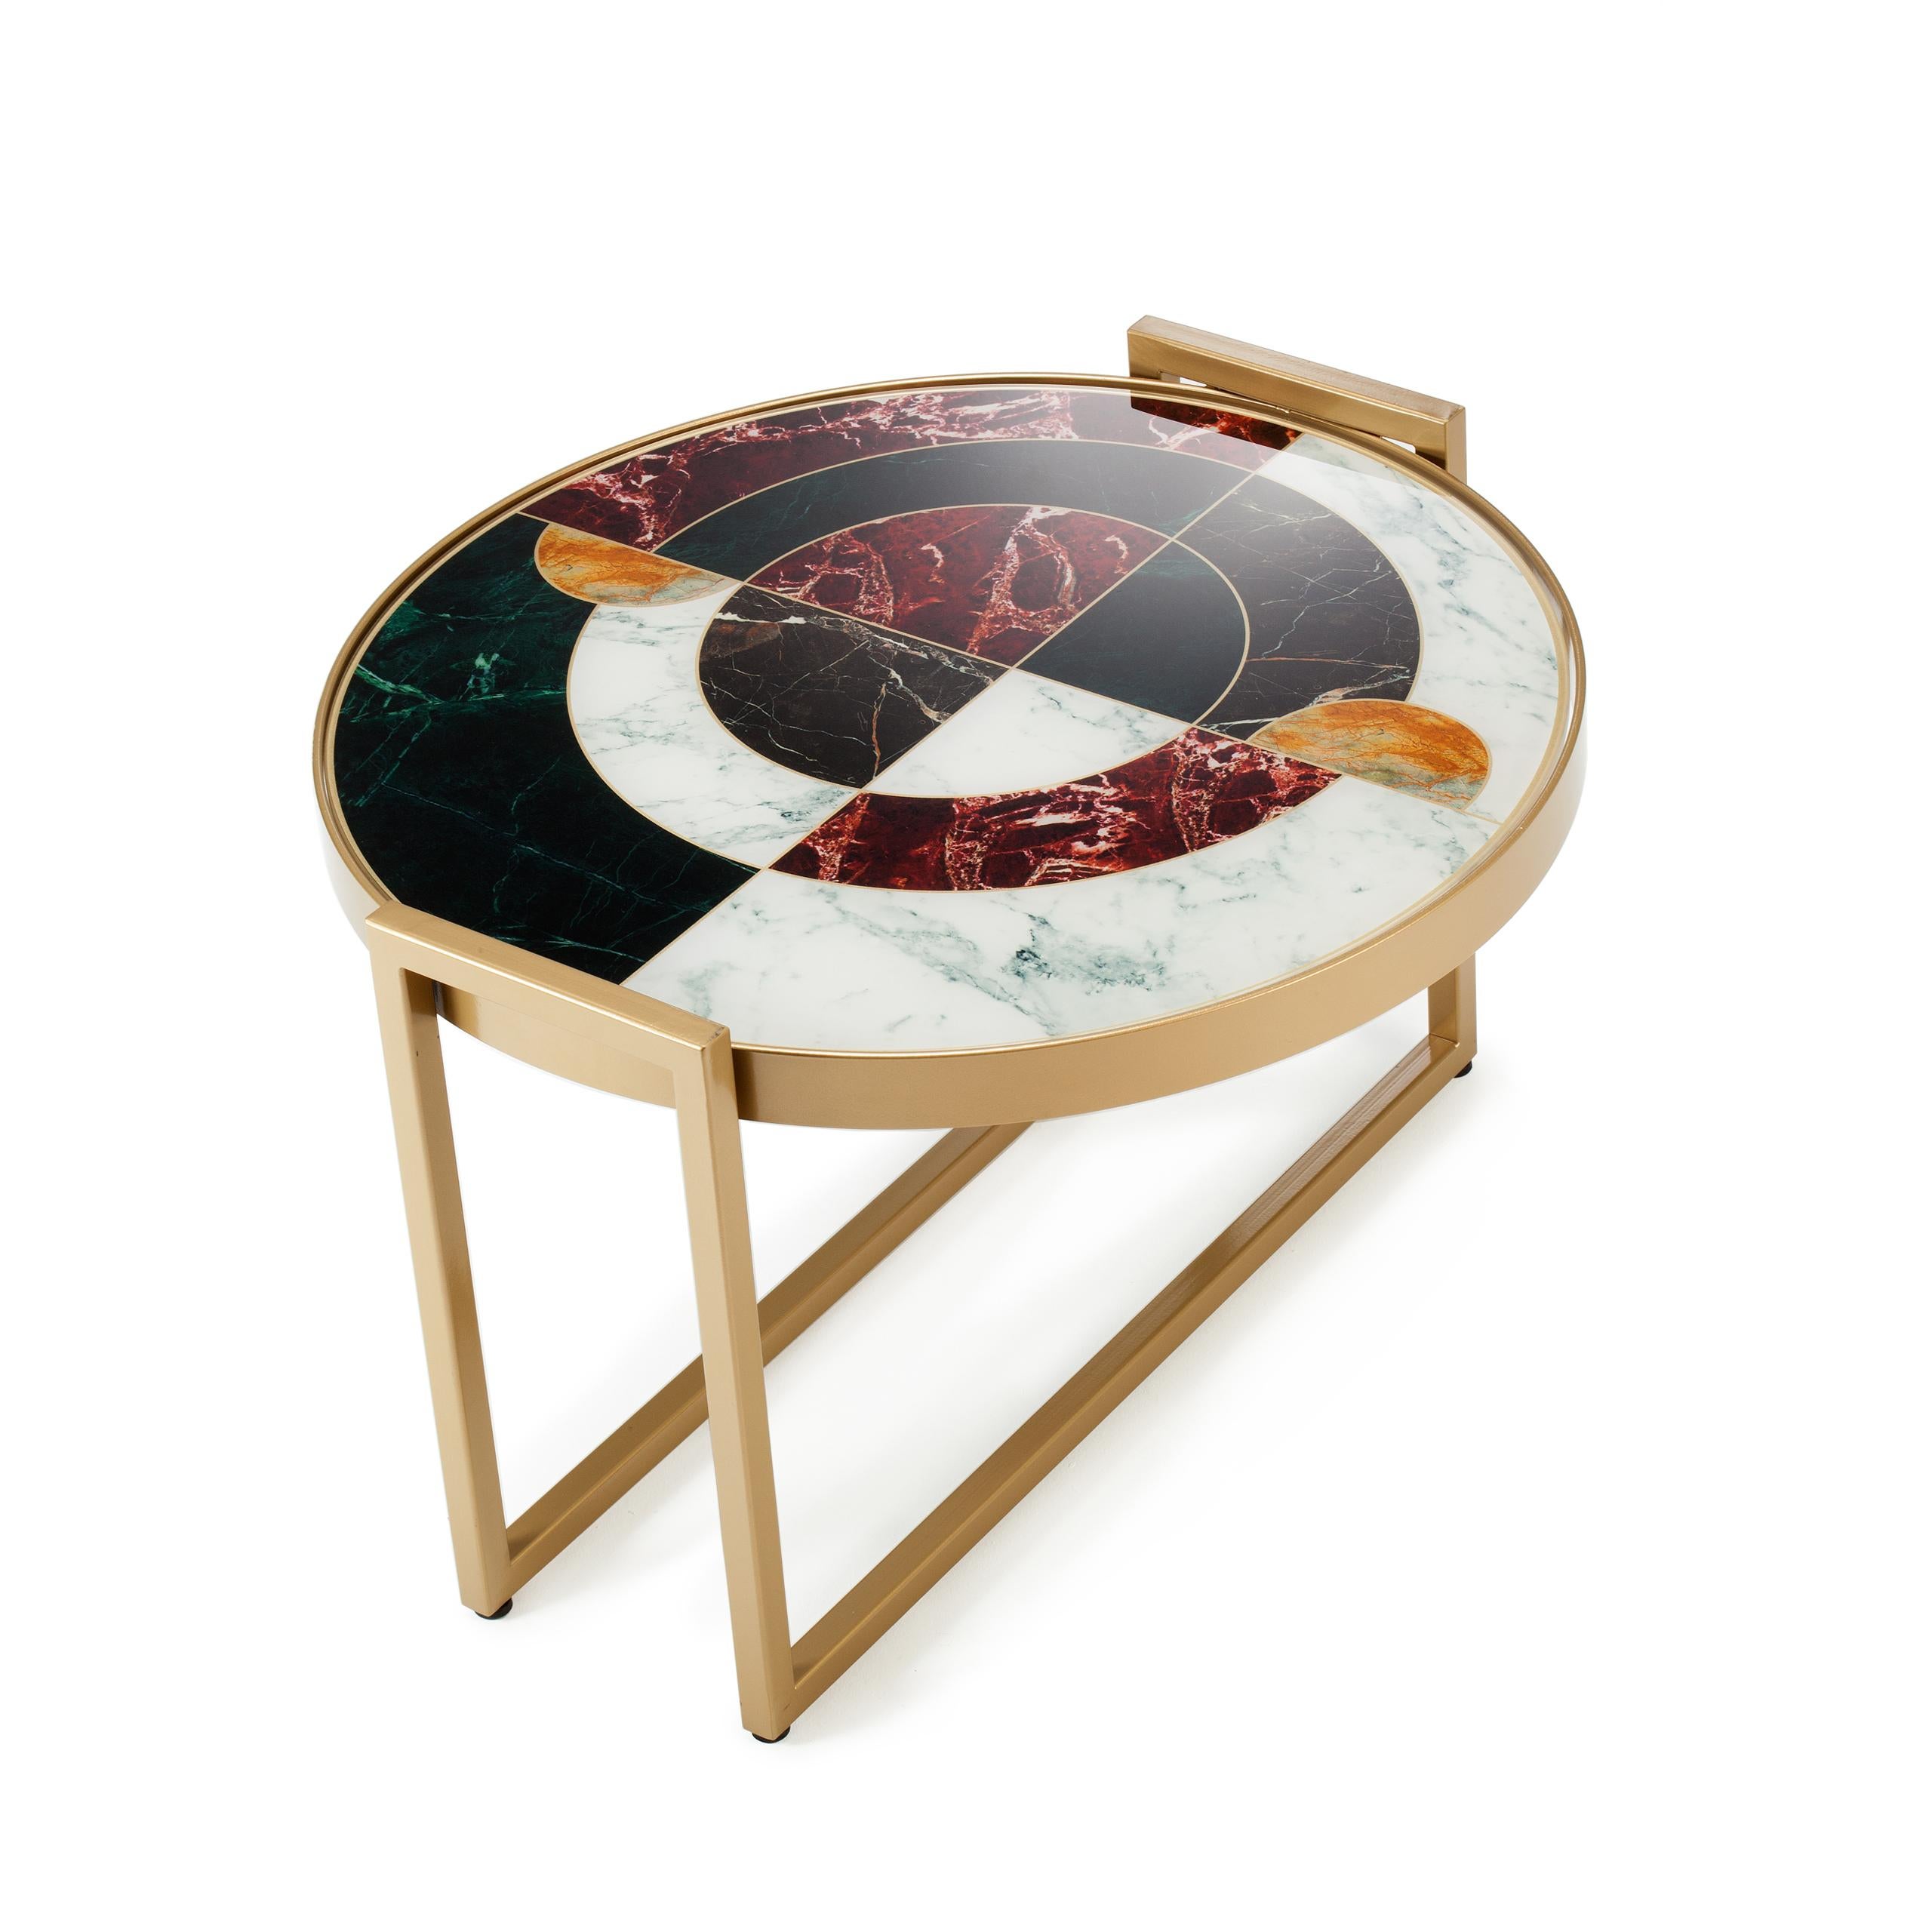 Norman side table brings a modern twist to traditional marble. A round top with bold, geometric pattern printed on tempered glass sits on a lacquered metal structure, making Norman a truly unique piece. Made to Order. 
